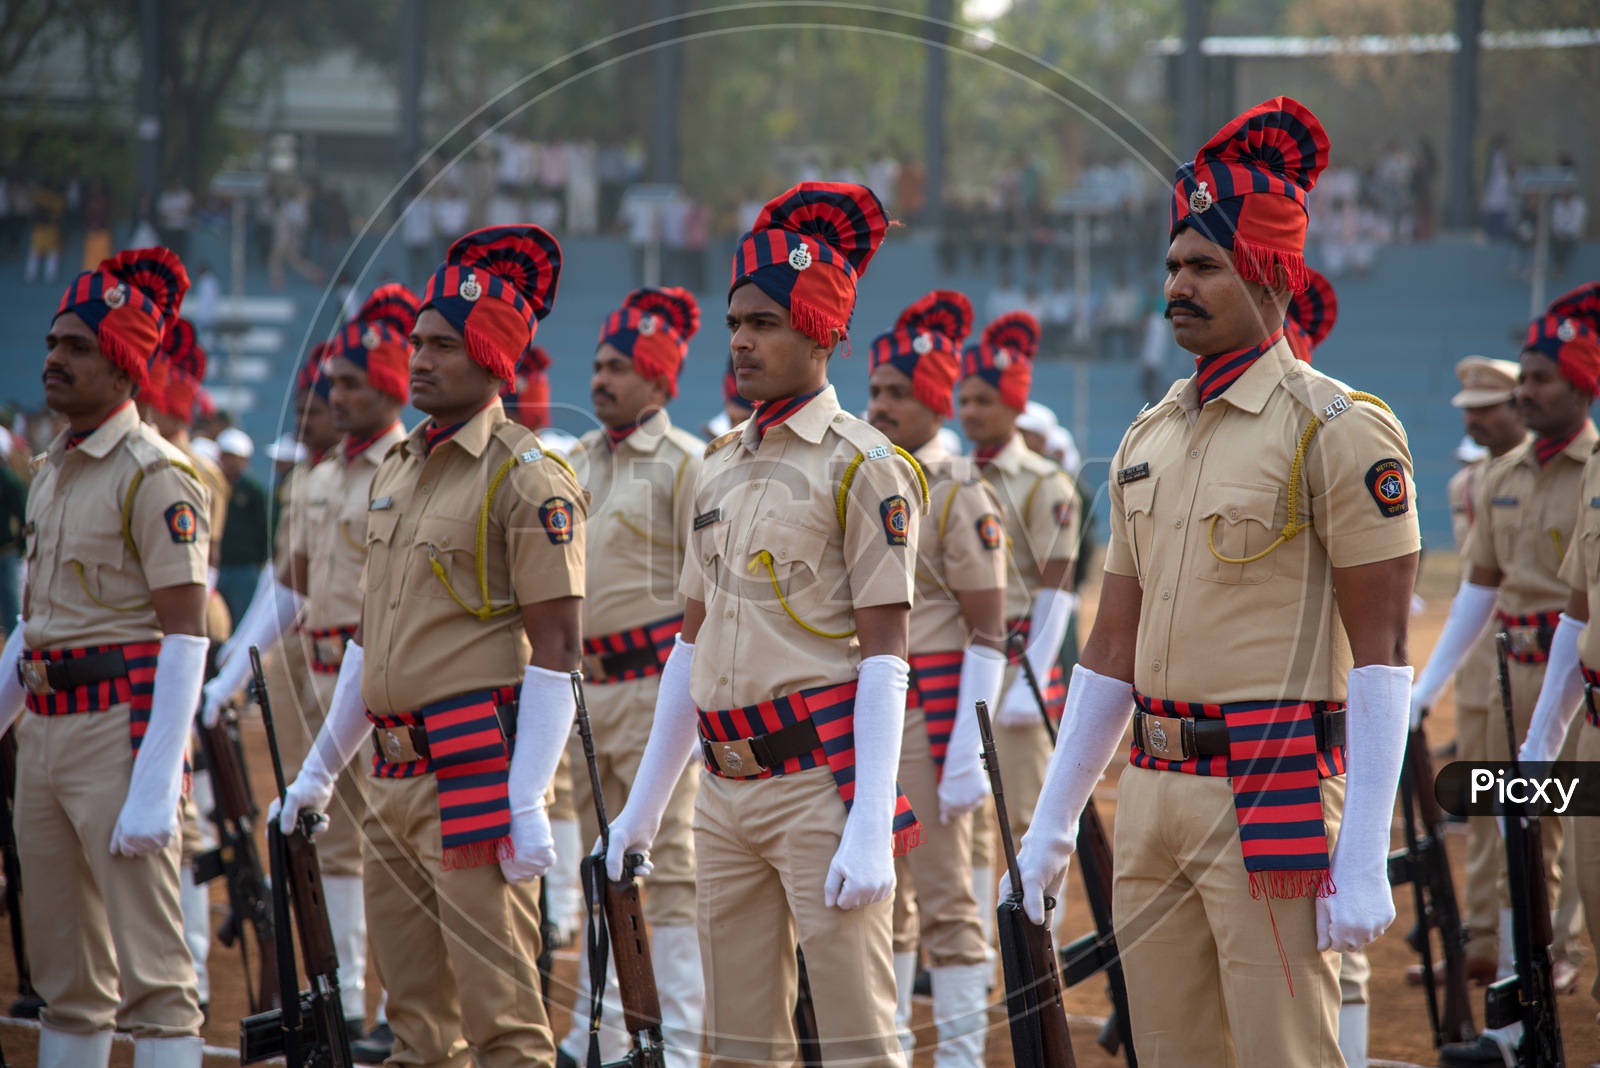 Maharashtra Cadet Police in The Independence Day Parade